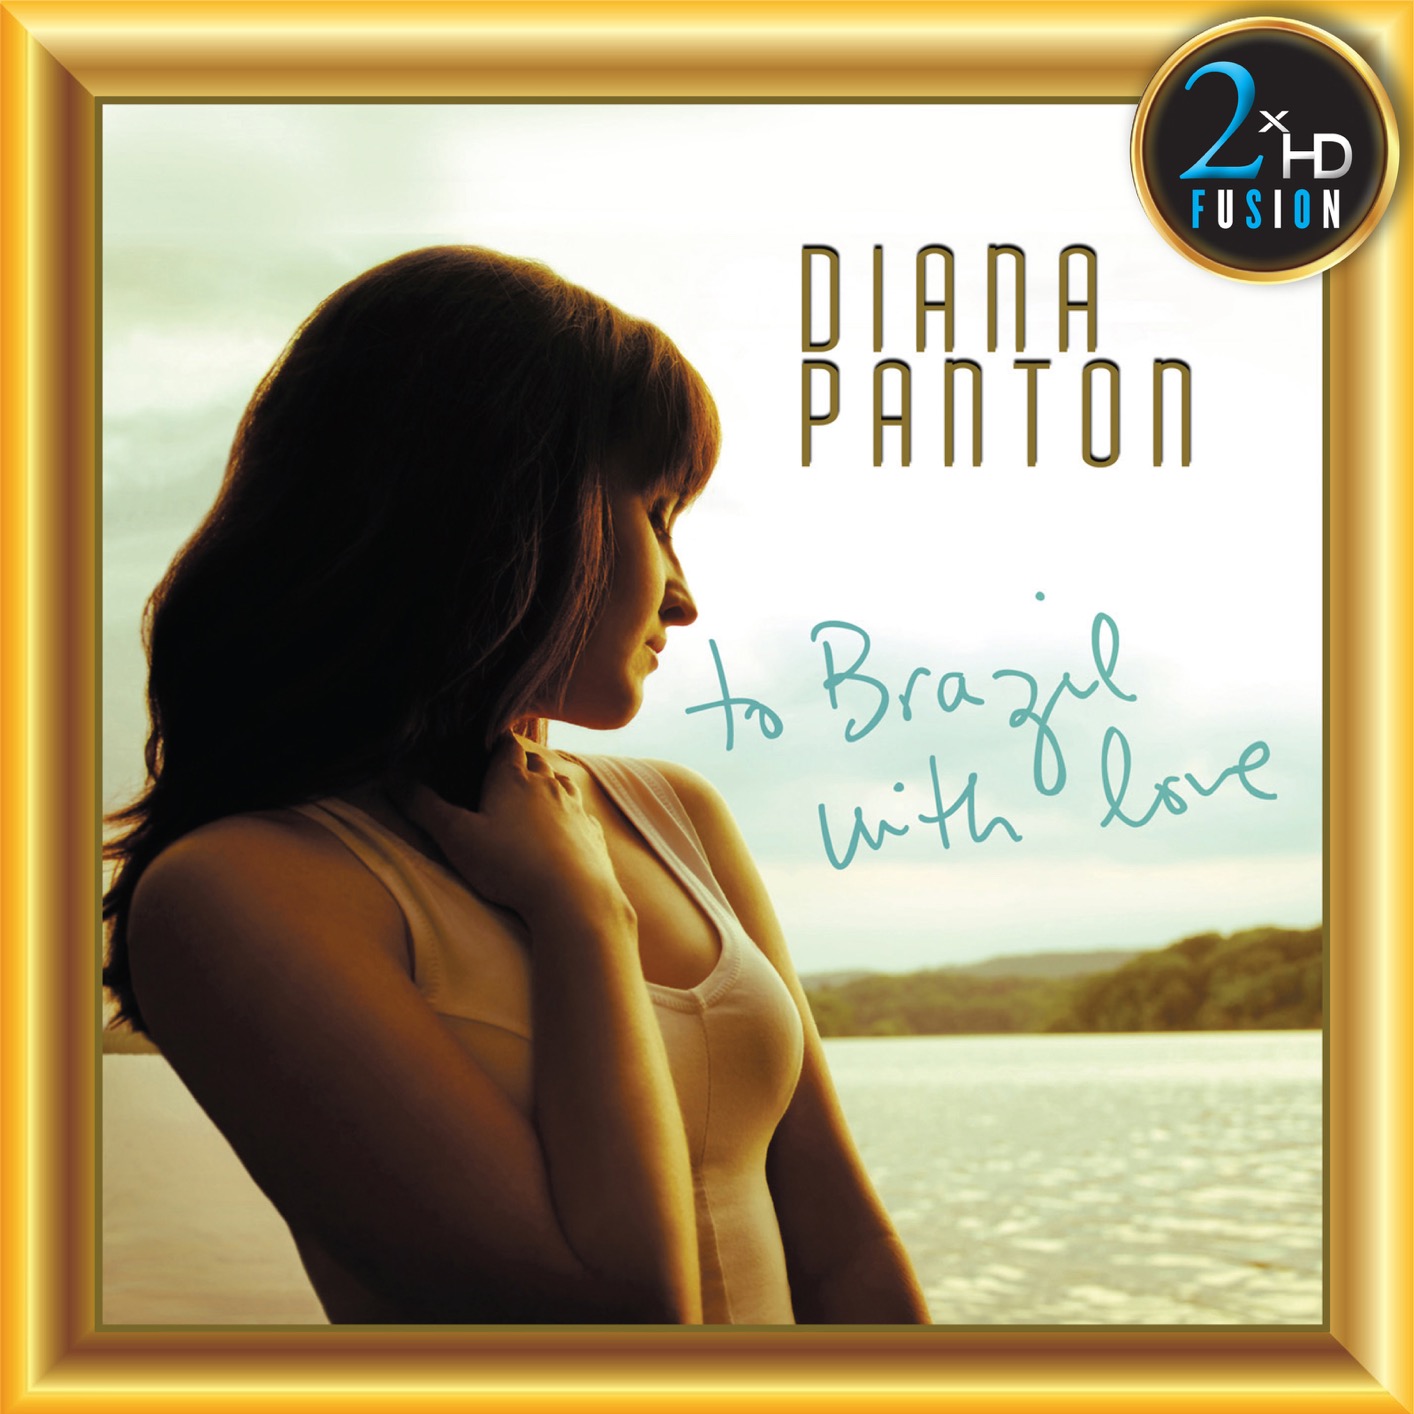 Diana Panton - To Brazil with Love (Remastered) (2011/2019) [FLAC 24bit/96kHz]